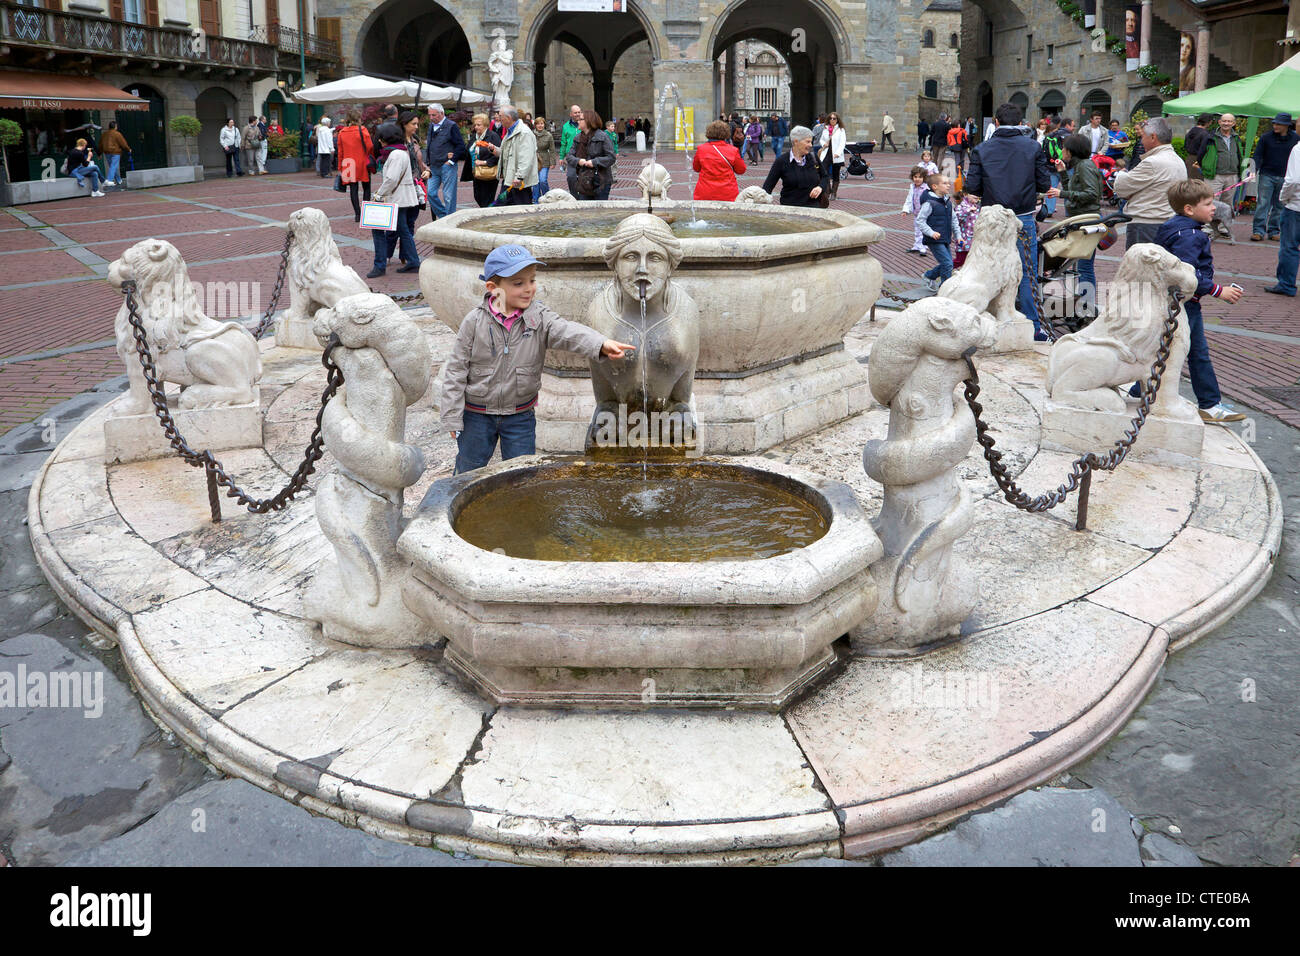 Young boy playing in the Contarini fountain, 1780, Piazza Vecchia, upper city, Bergamo, Lombardy, Italy, Europe Stock Photo